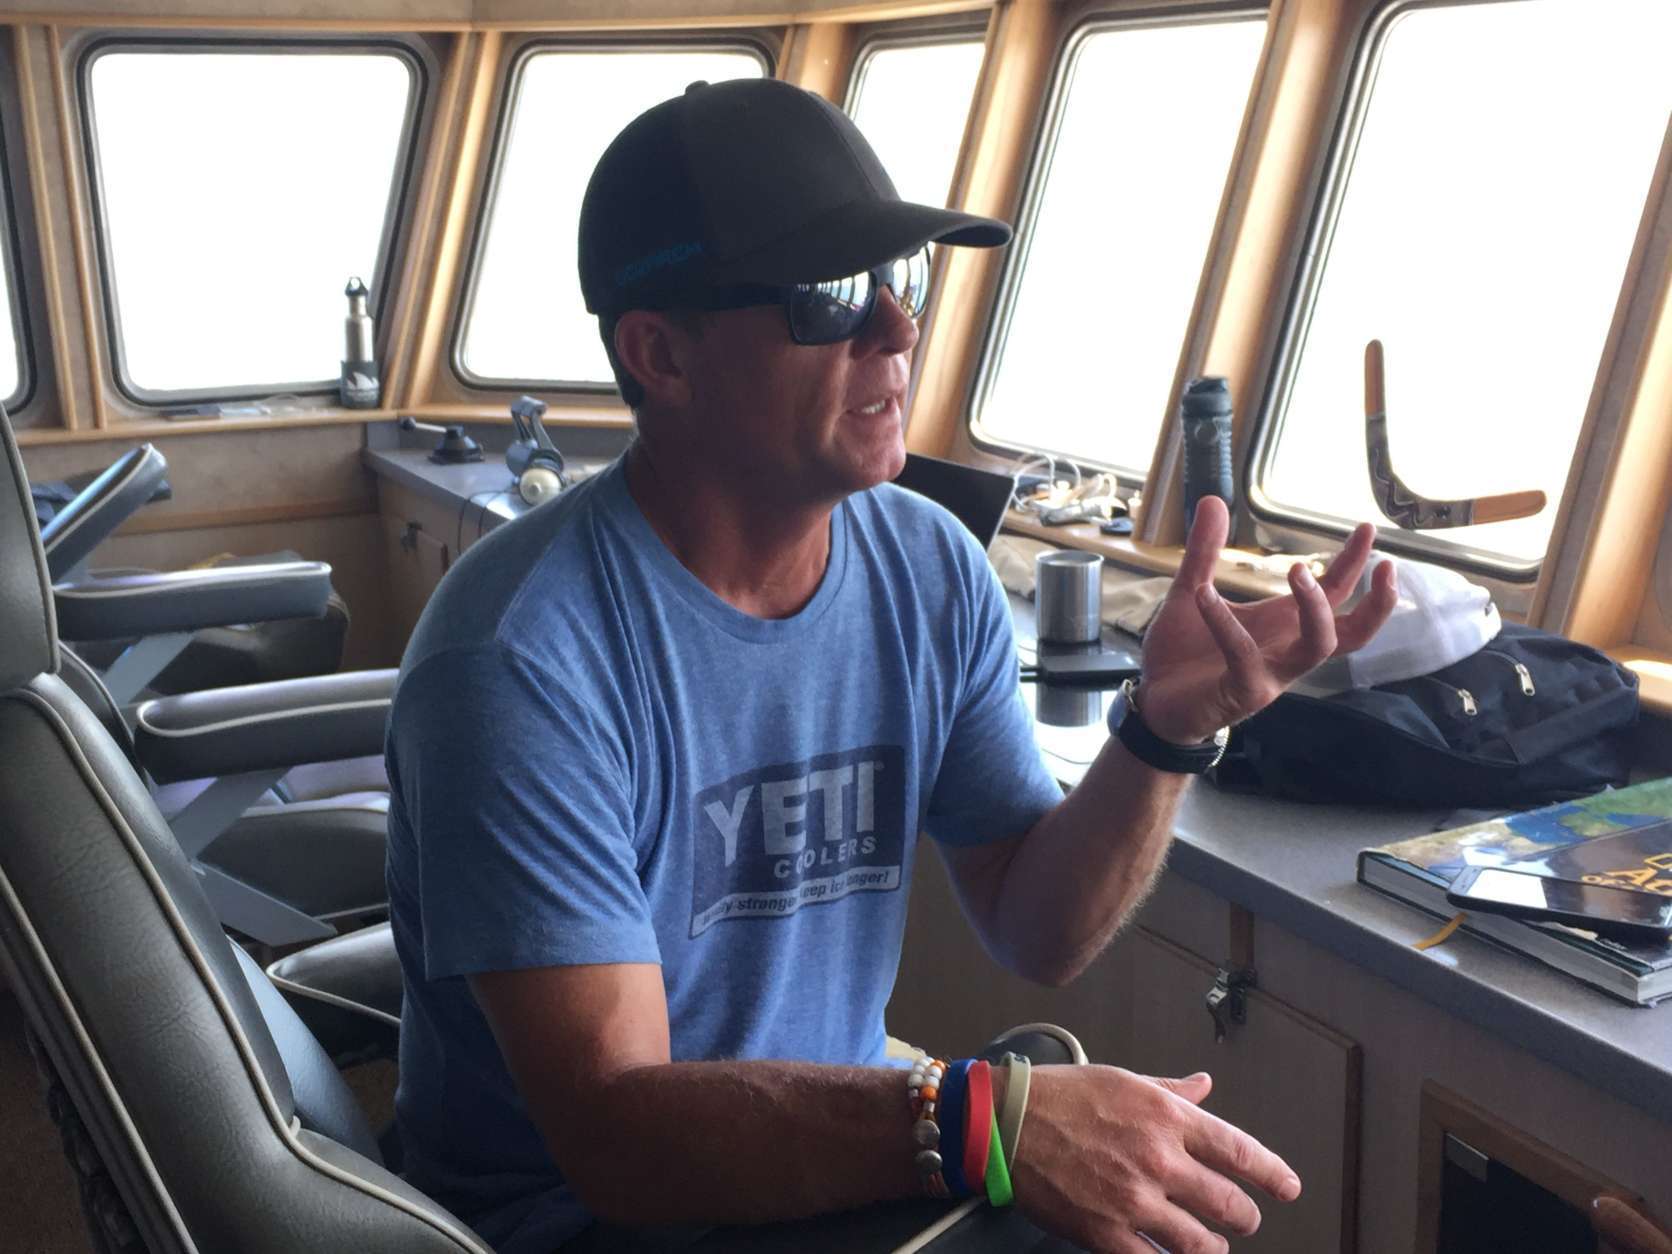 OCEARCH founding chairman and expedition leader Chris Fischer told WTOP about the importance of sharks to the marine food web. (WTOP/Michelle Basch)